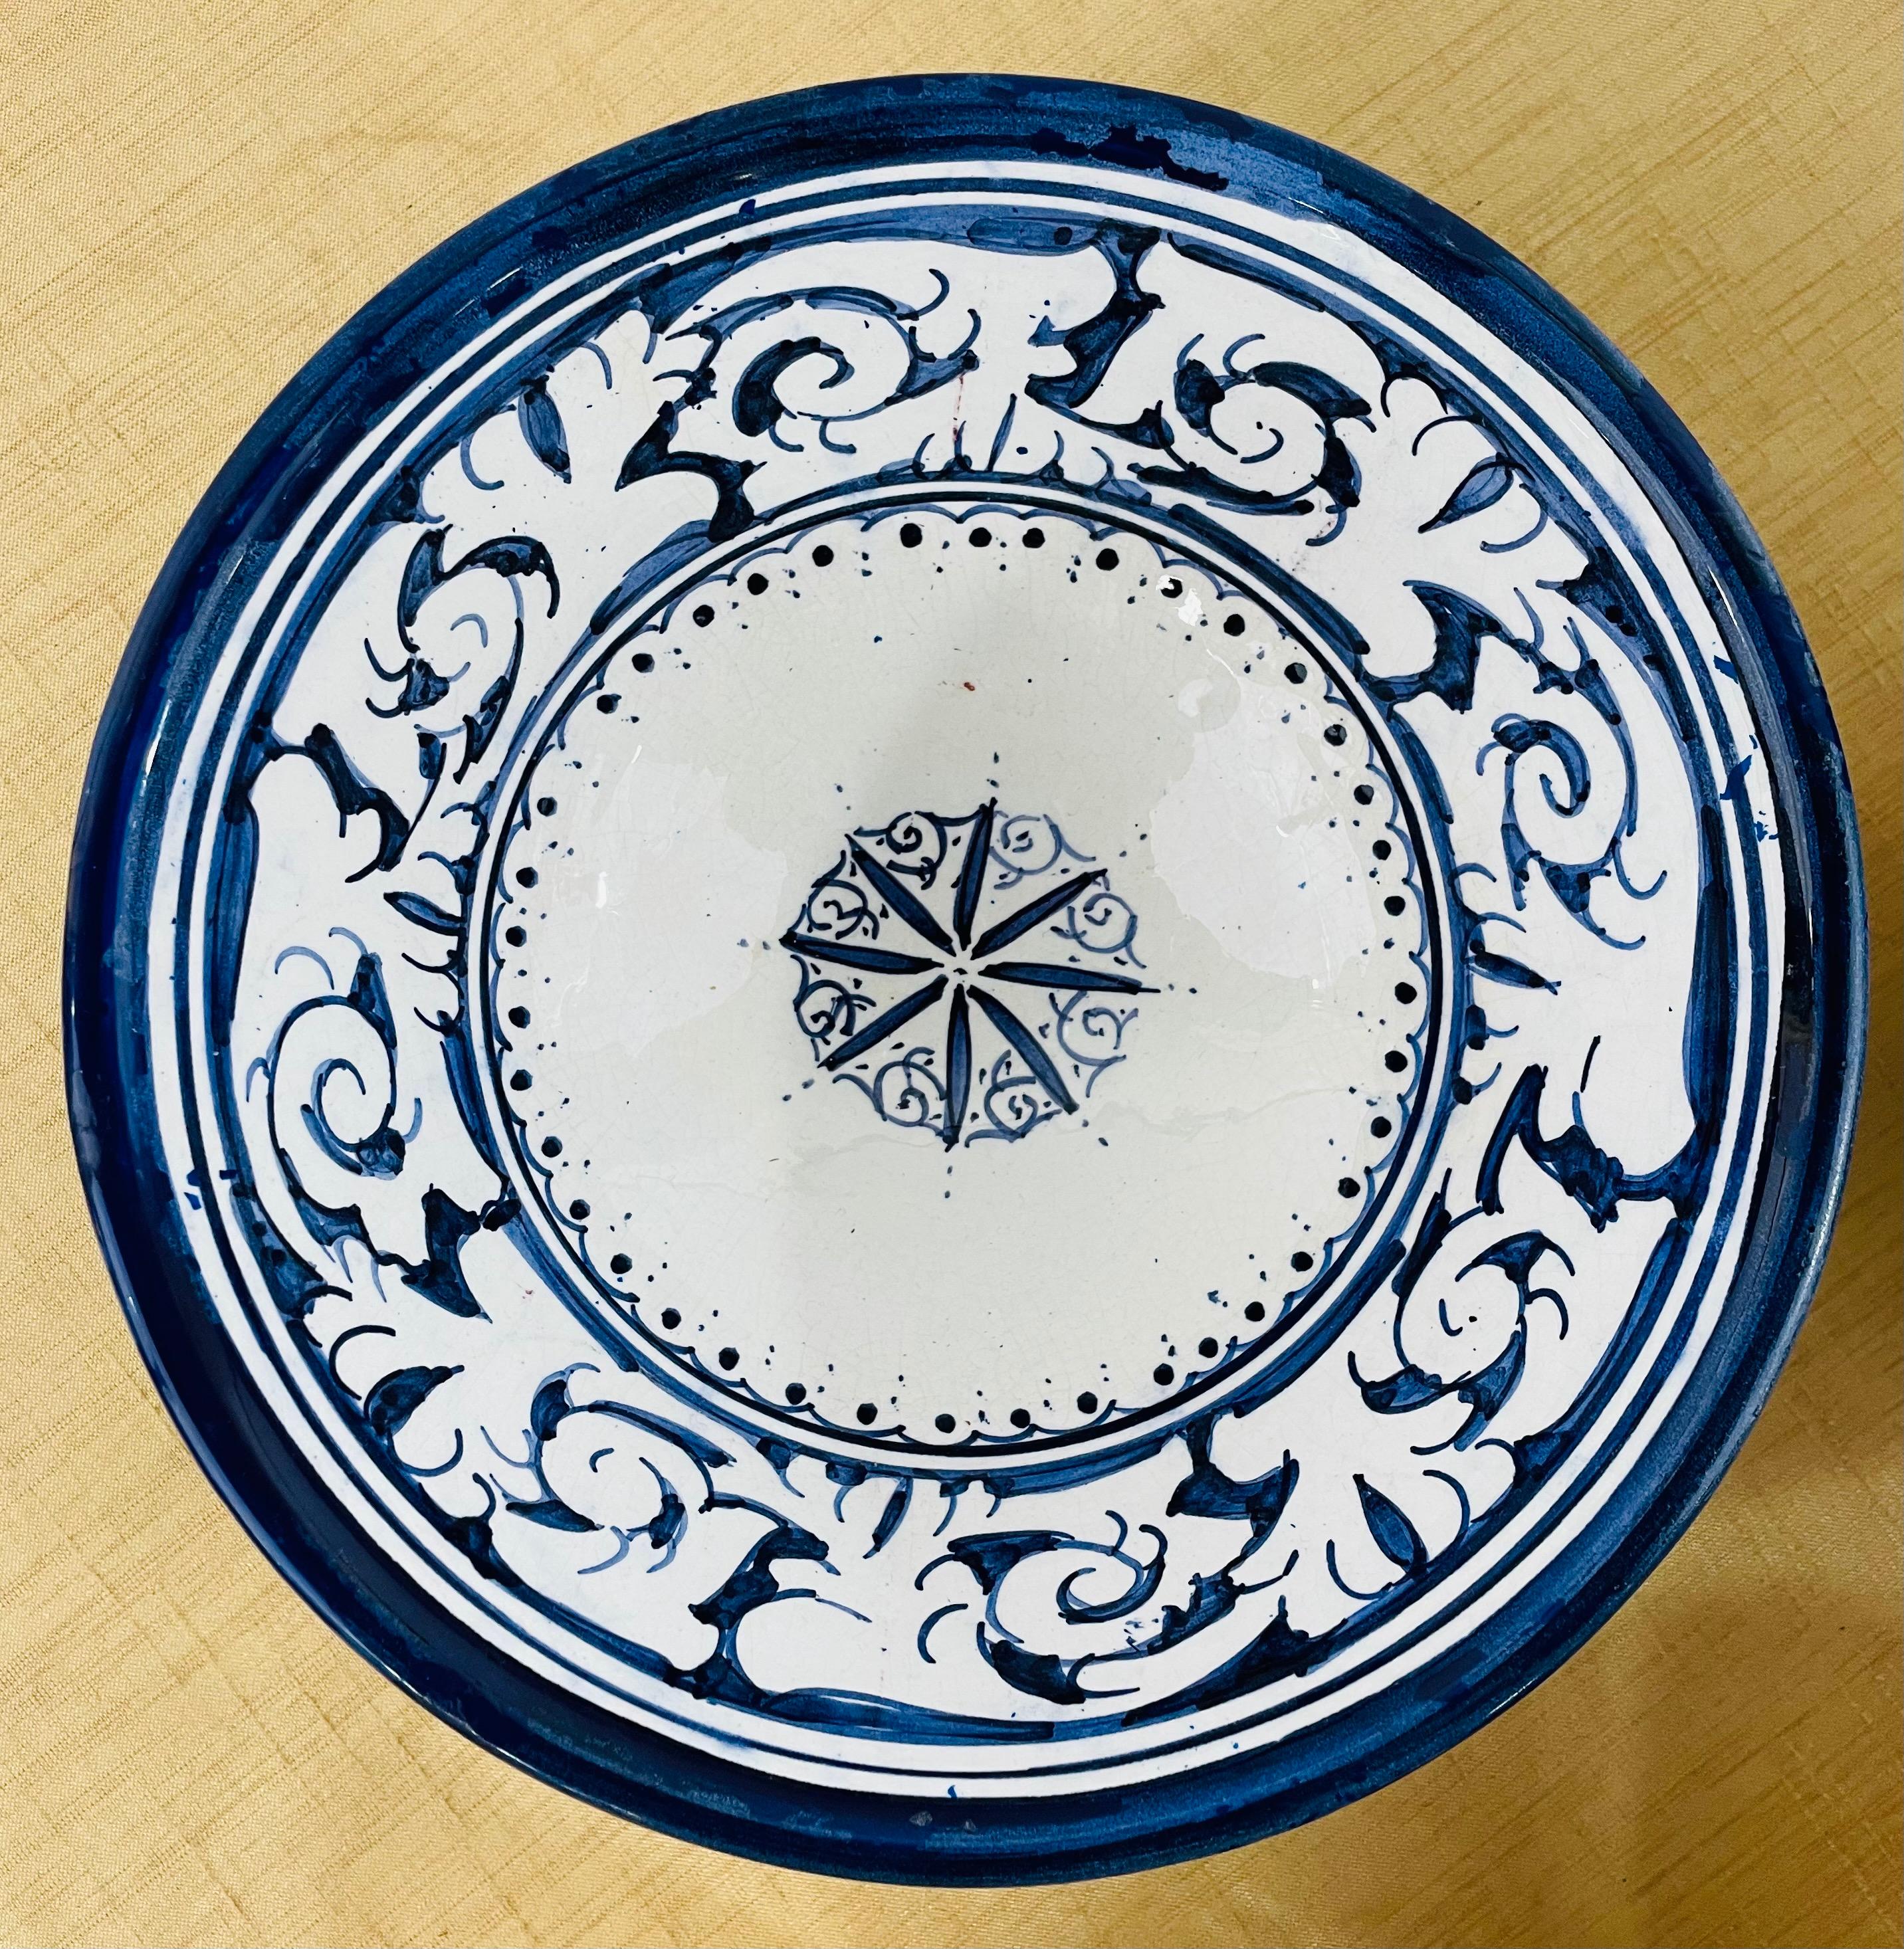 A set of four handmade vintage Moroccan bowls. With a wonderfully intricate and harmonious arabesque design pattern, this handcrafted set of blue and white ceramic bowls will add an exotic touch of color and distinction to your dining experience.